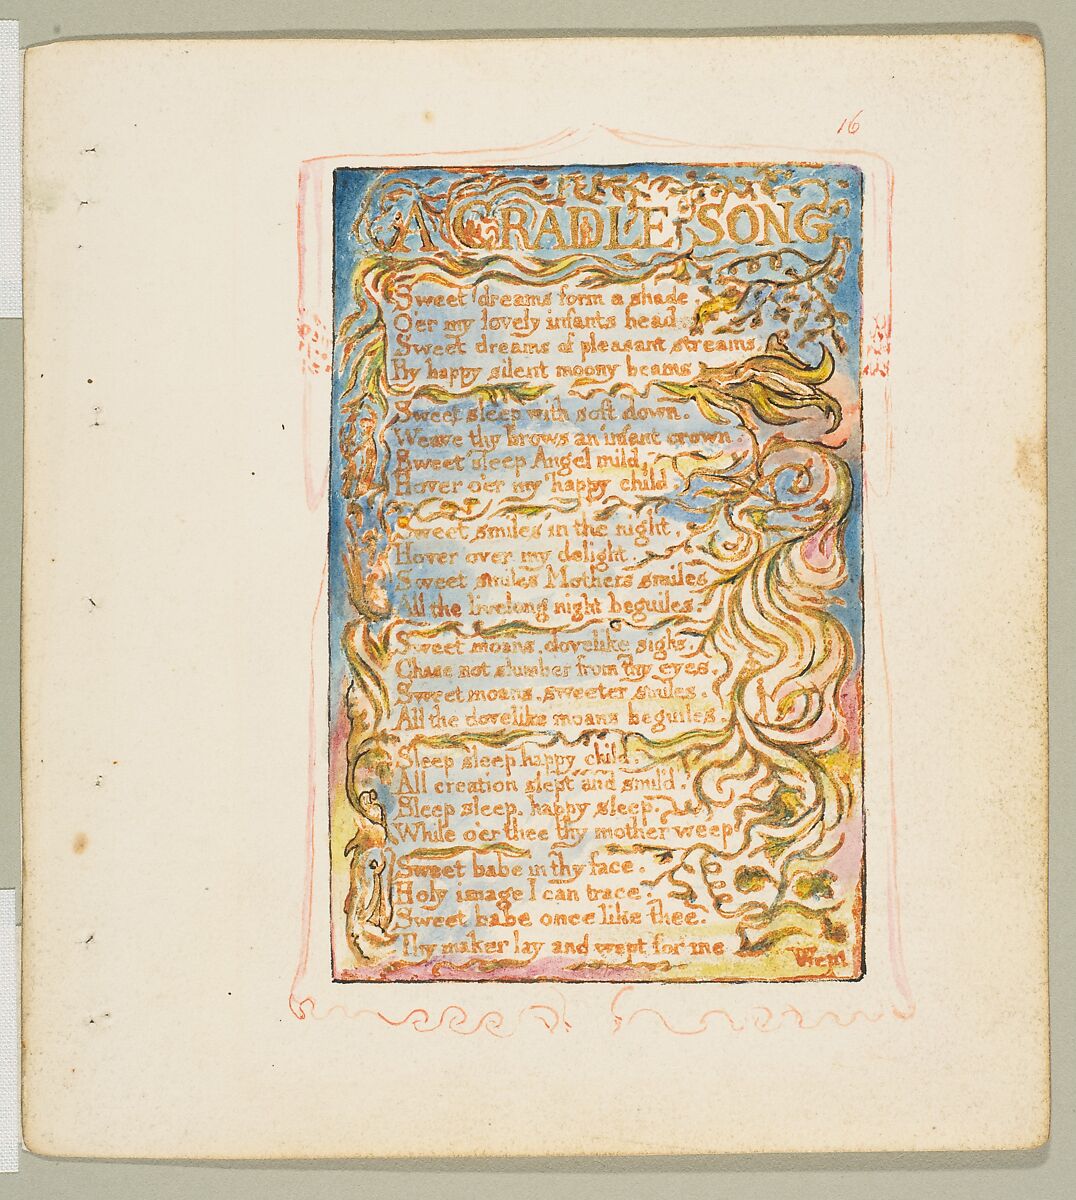 Songs of Innocence: A Cradle Song, William Blake  British, Relief etching printed in orange-brown ink and hand-colored with watercolor and shell gold